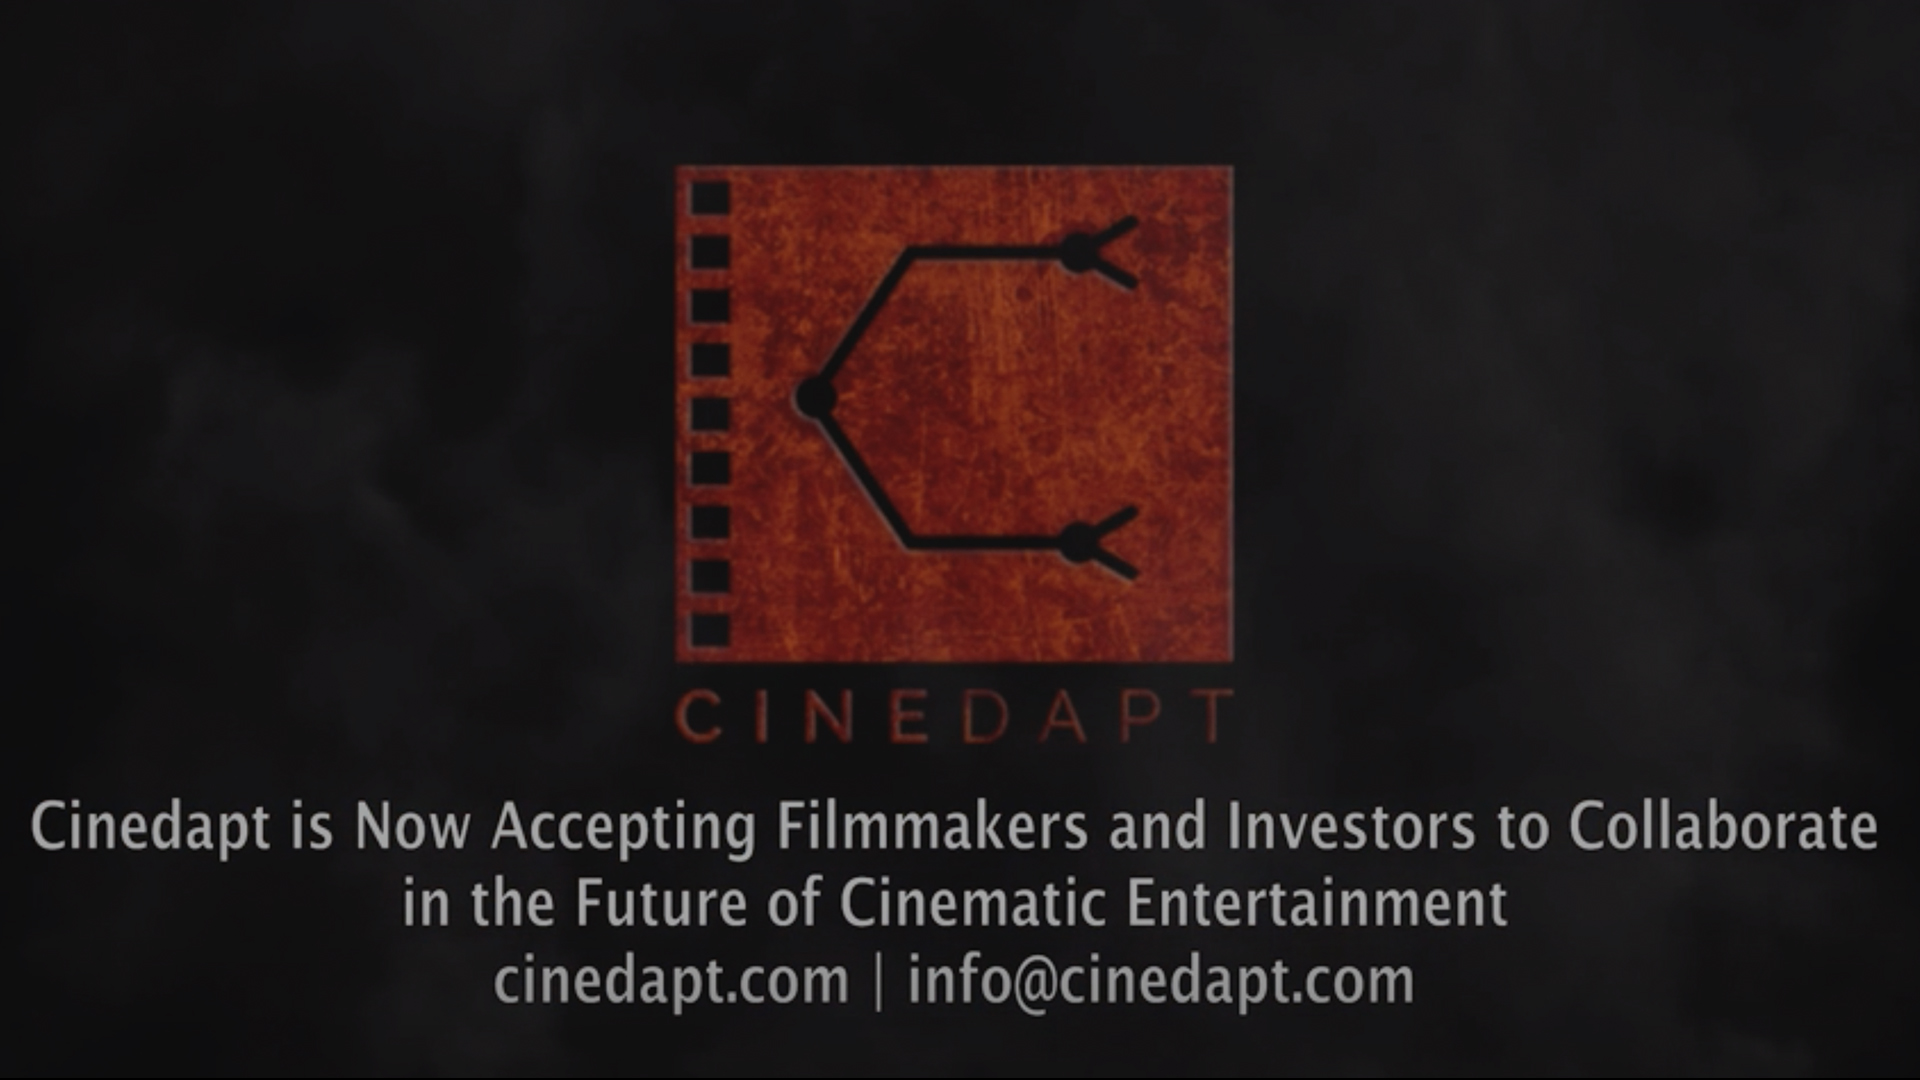 Cinedapt Revitalizes the Entertainment Industry to End Piracy with Personalized Films